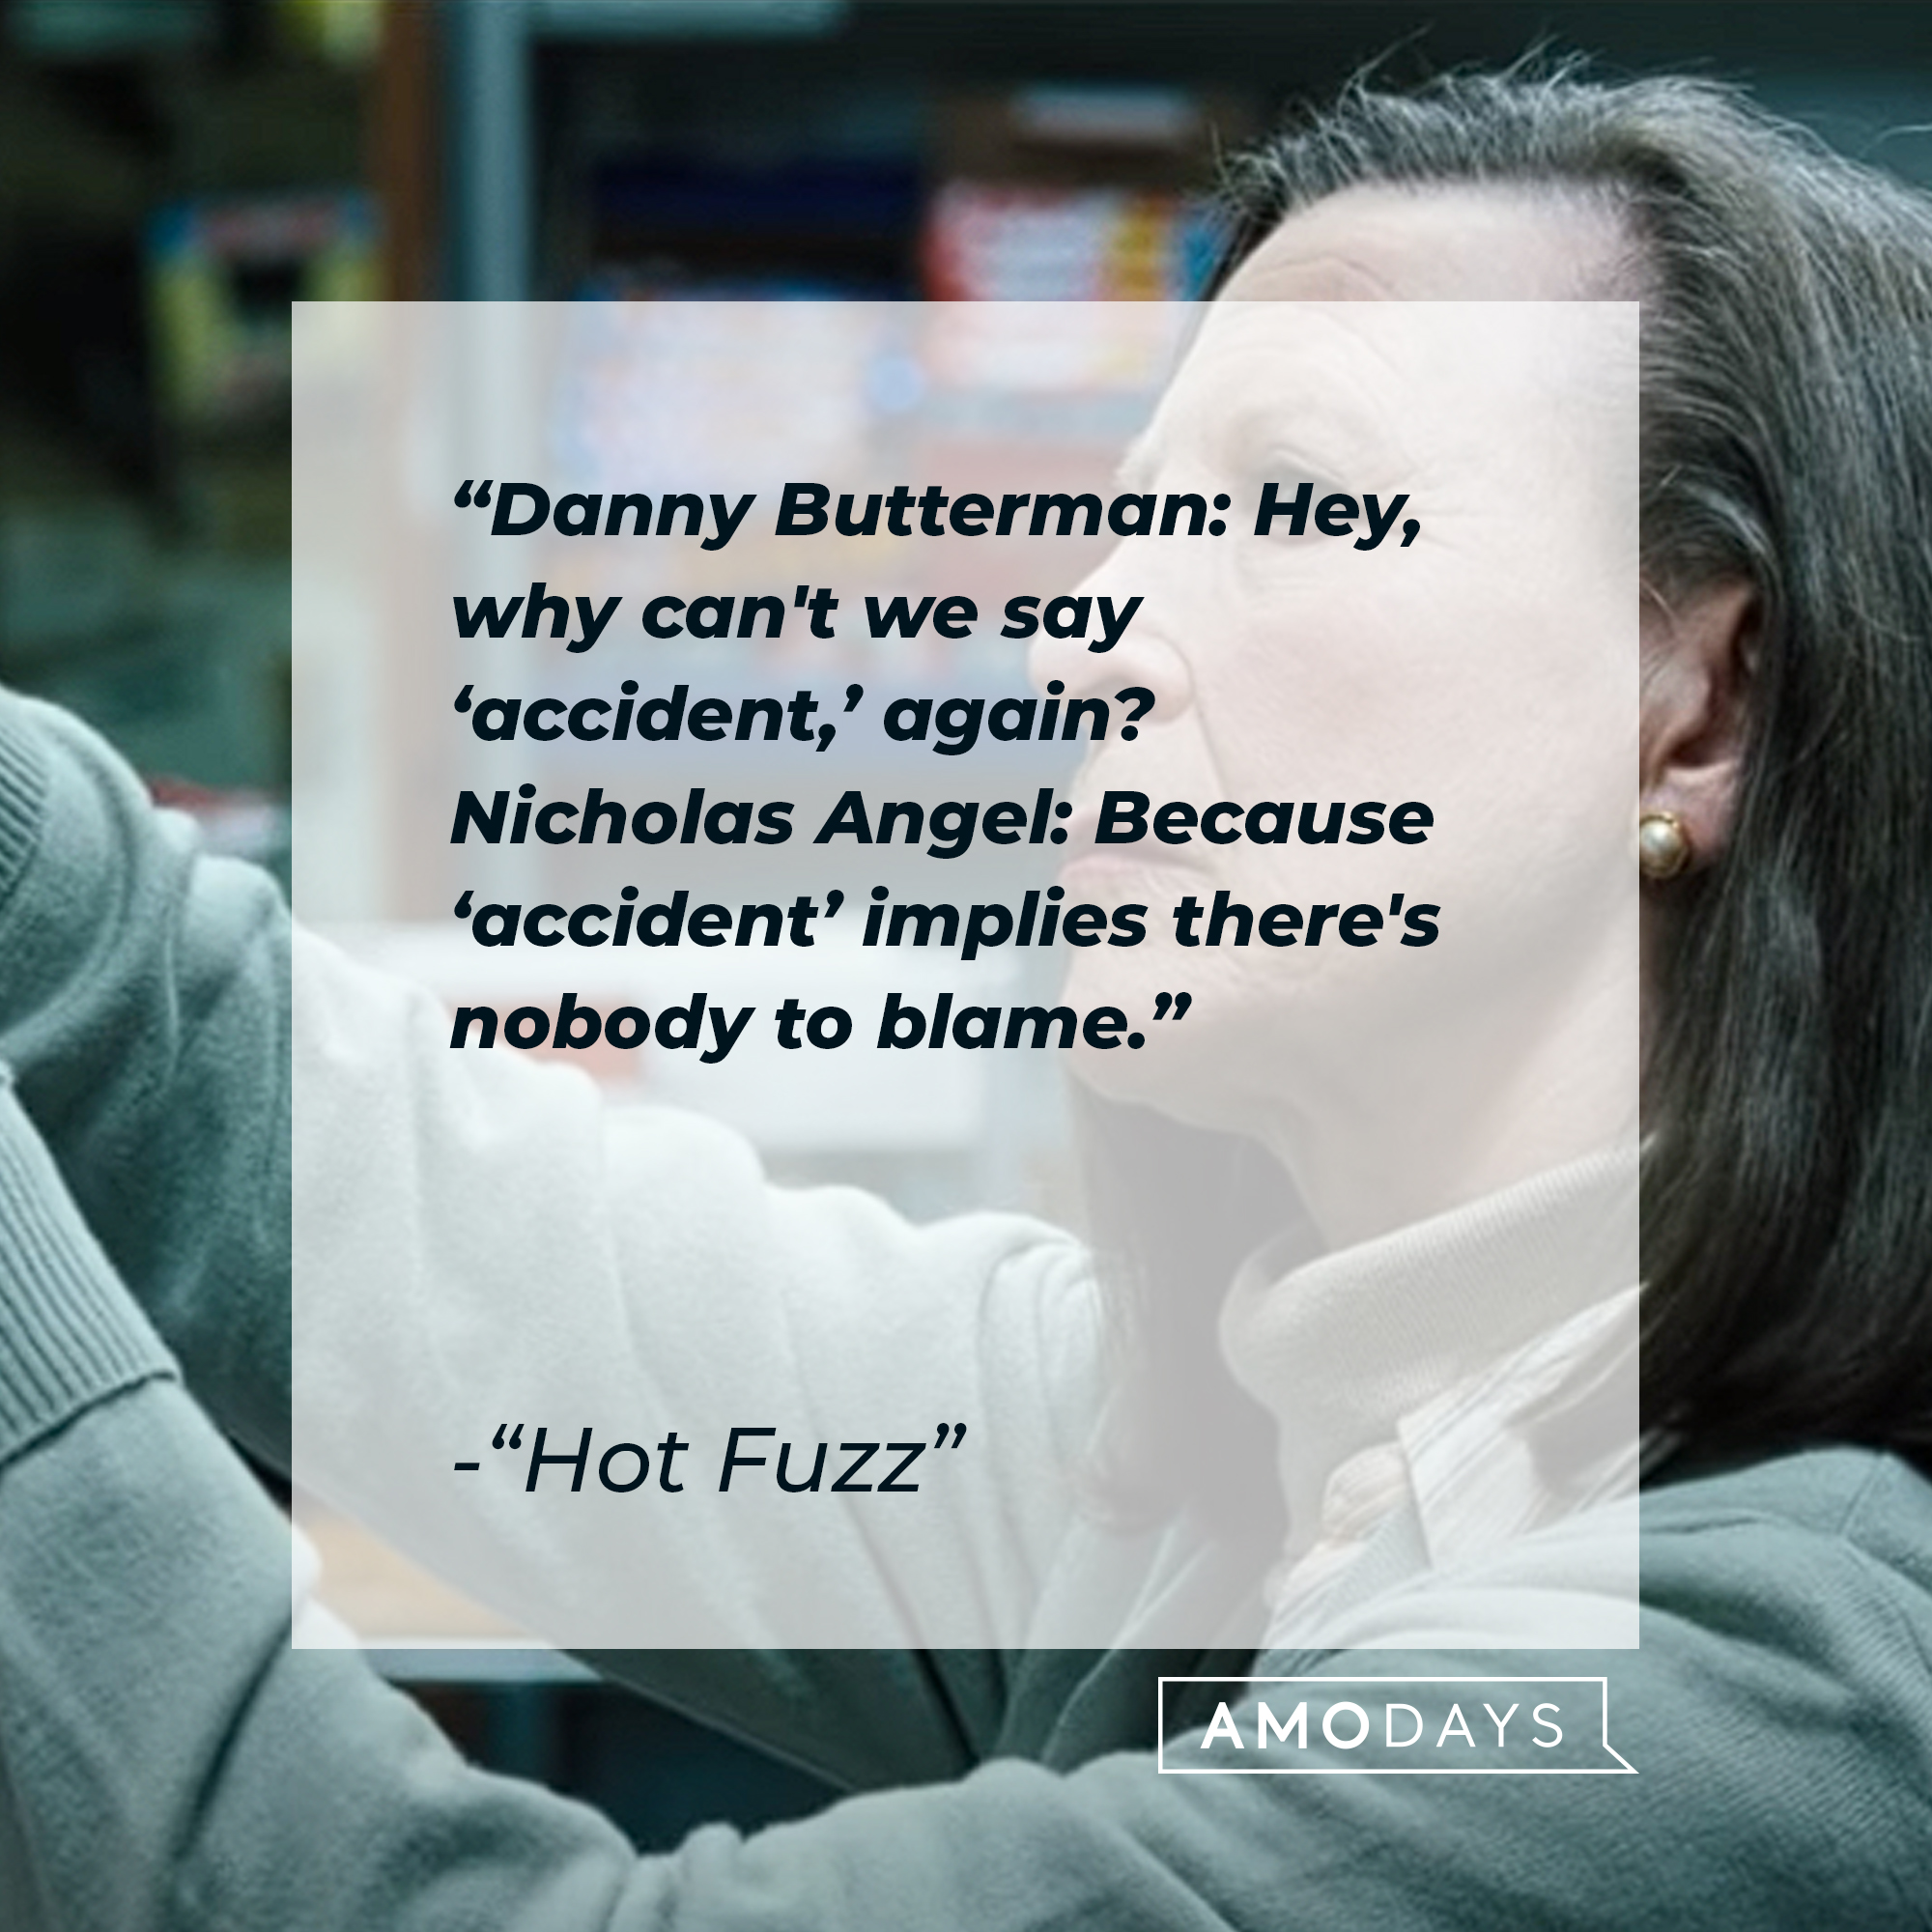 Nicholas Angel and Danny Butterman's quotes in "Hot Fuzz:" “Danny Butterman: Hey, why can't we say ‘accident,’ again? Nicholas Angel: Because ‘accident’ implies there's nobody to blame.” | Source: Youtube.com/UniversalPictures